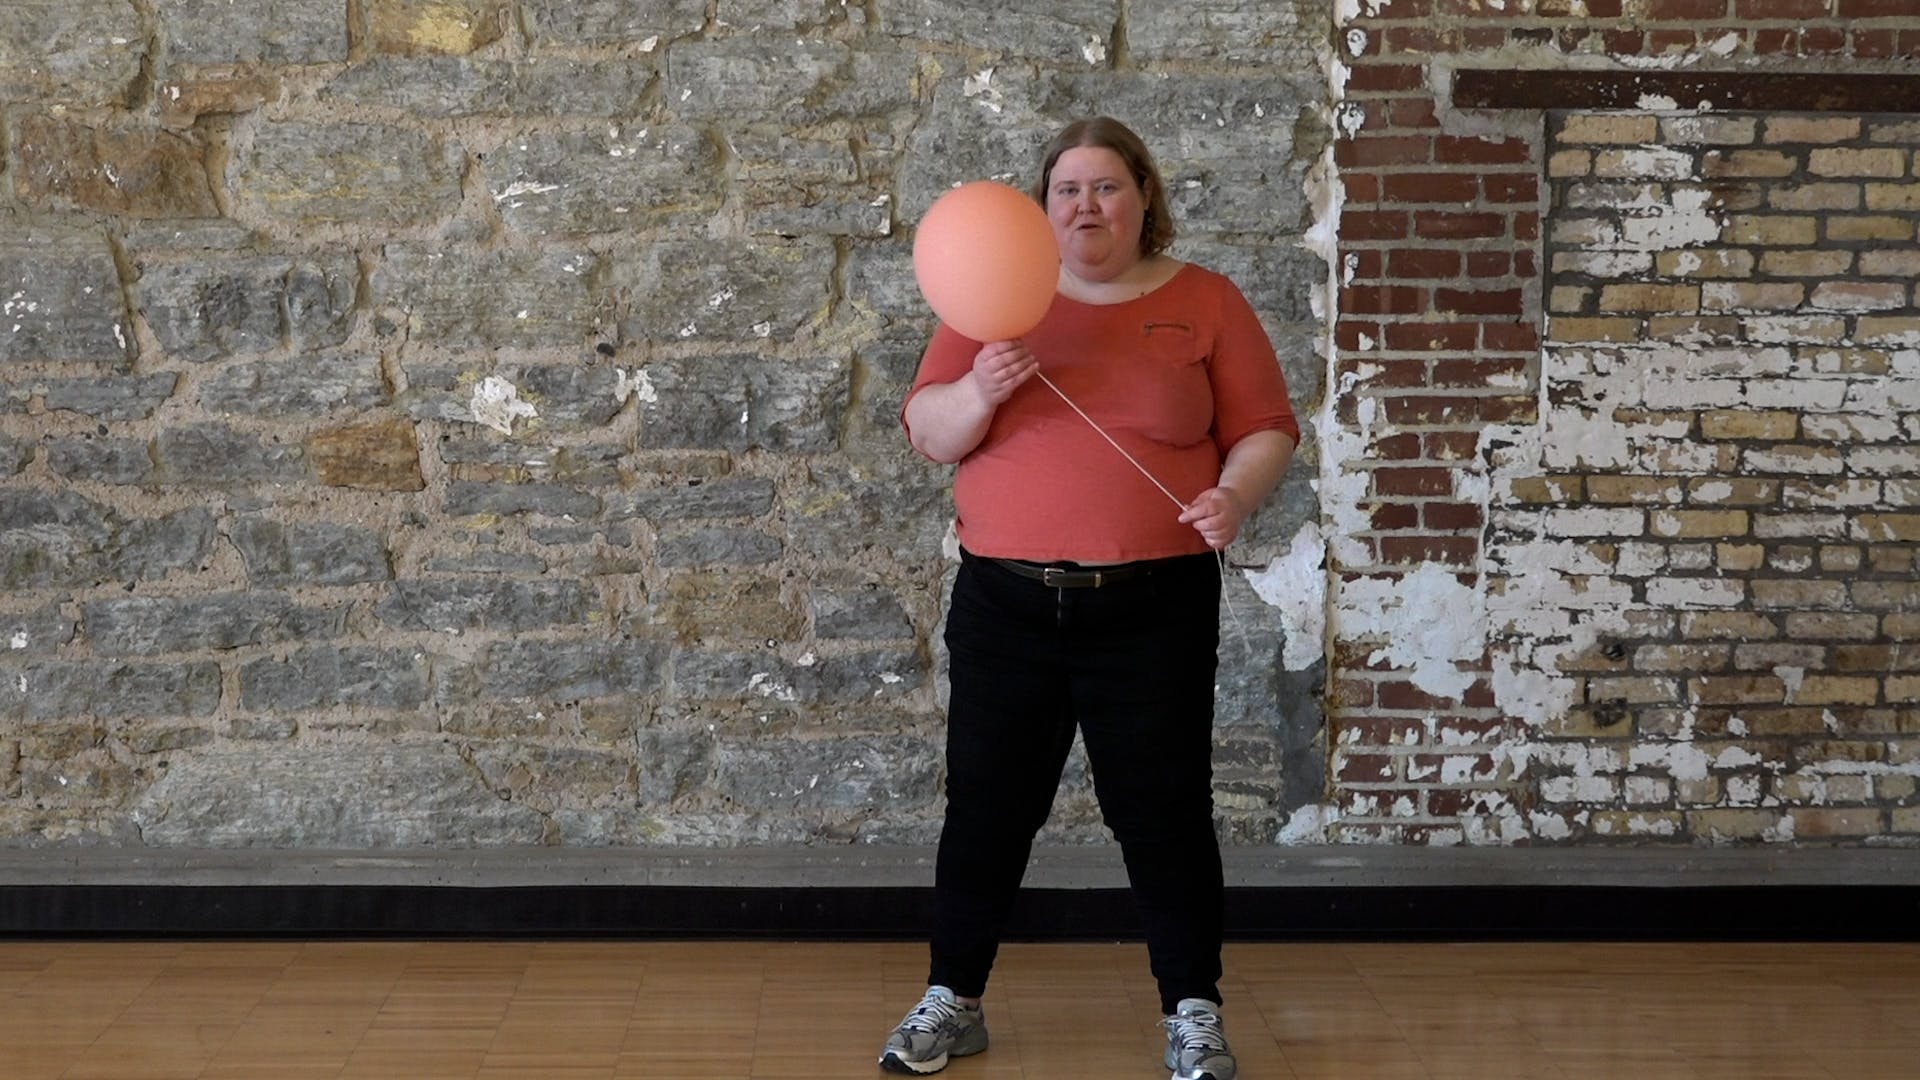 Alison Bergblom Johnson, a plus-size woman with hair just above her shoulders, wearing a casual peach top and jeans with sneakers holding a peach balloon attached to a length of kitchen twine.